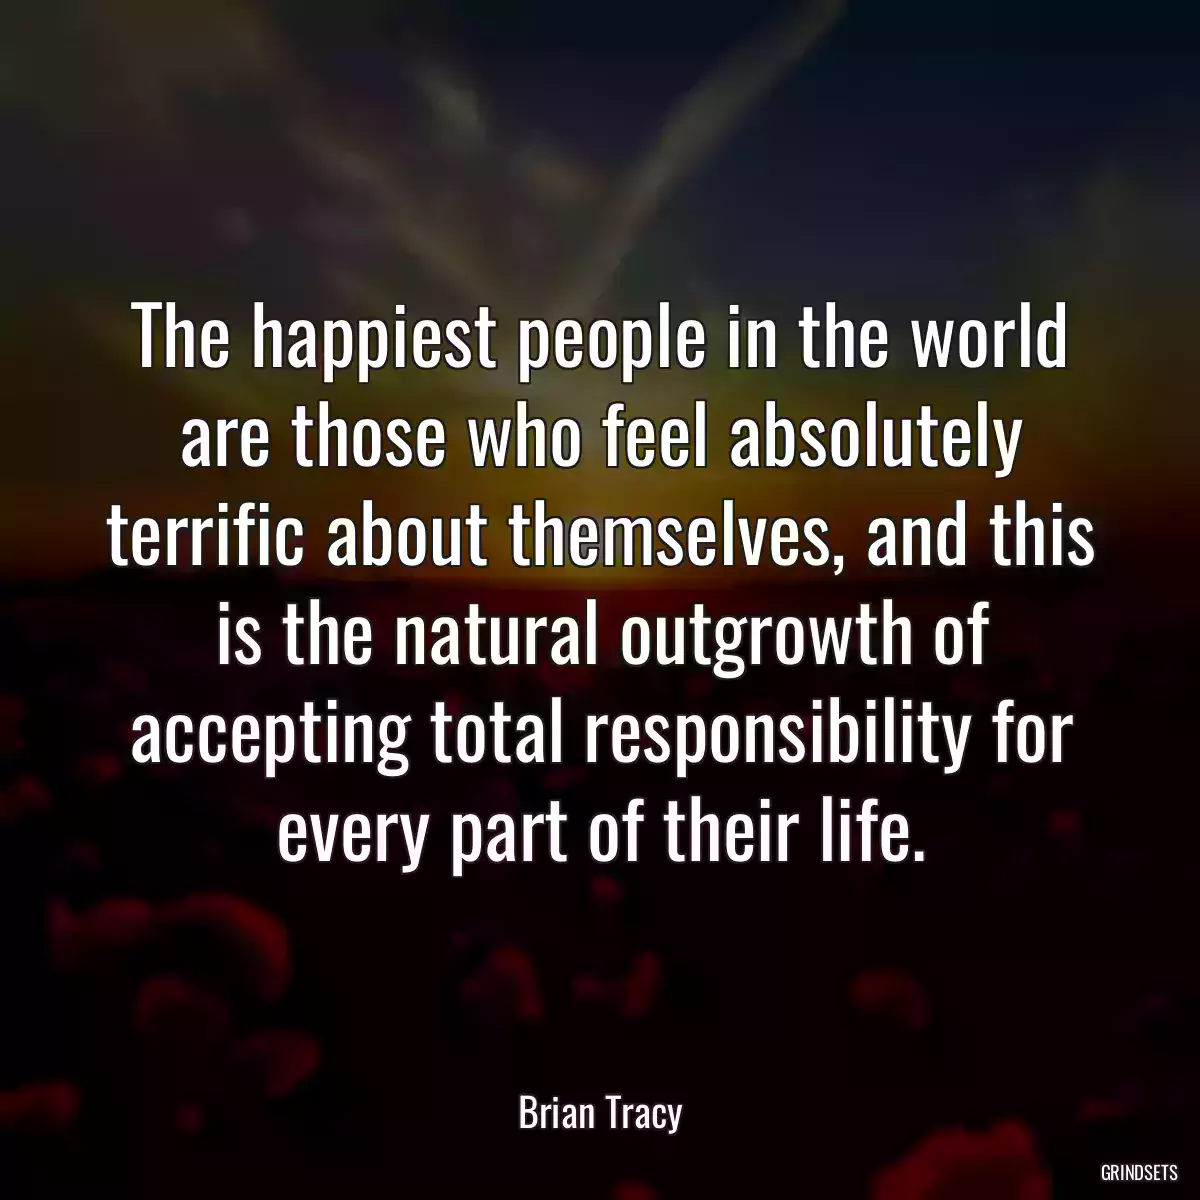 The happiest people in the world are those who feel absolutely terrific about themselves, and this is the natural outgrowth of accepting total responsibility for every part of their life.